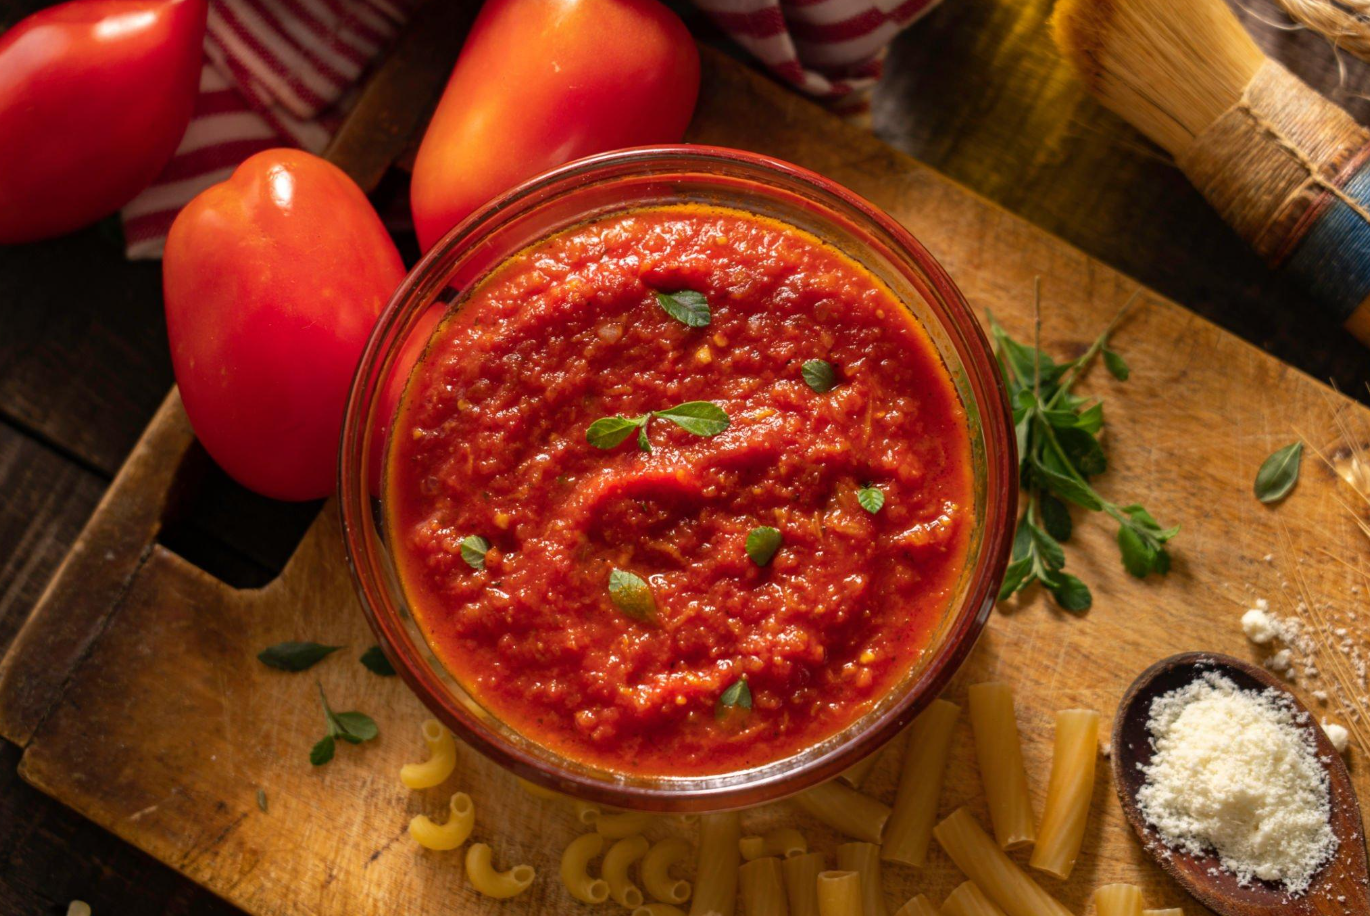 Storing homemade salsa in airtight containers in a refrigerator to maximize freshness.